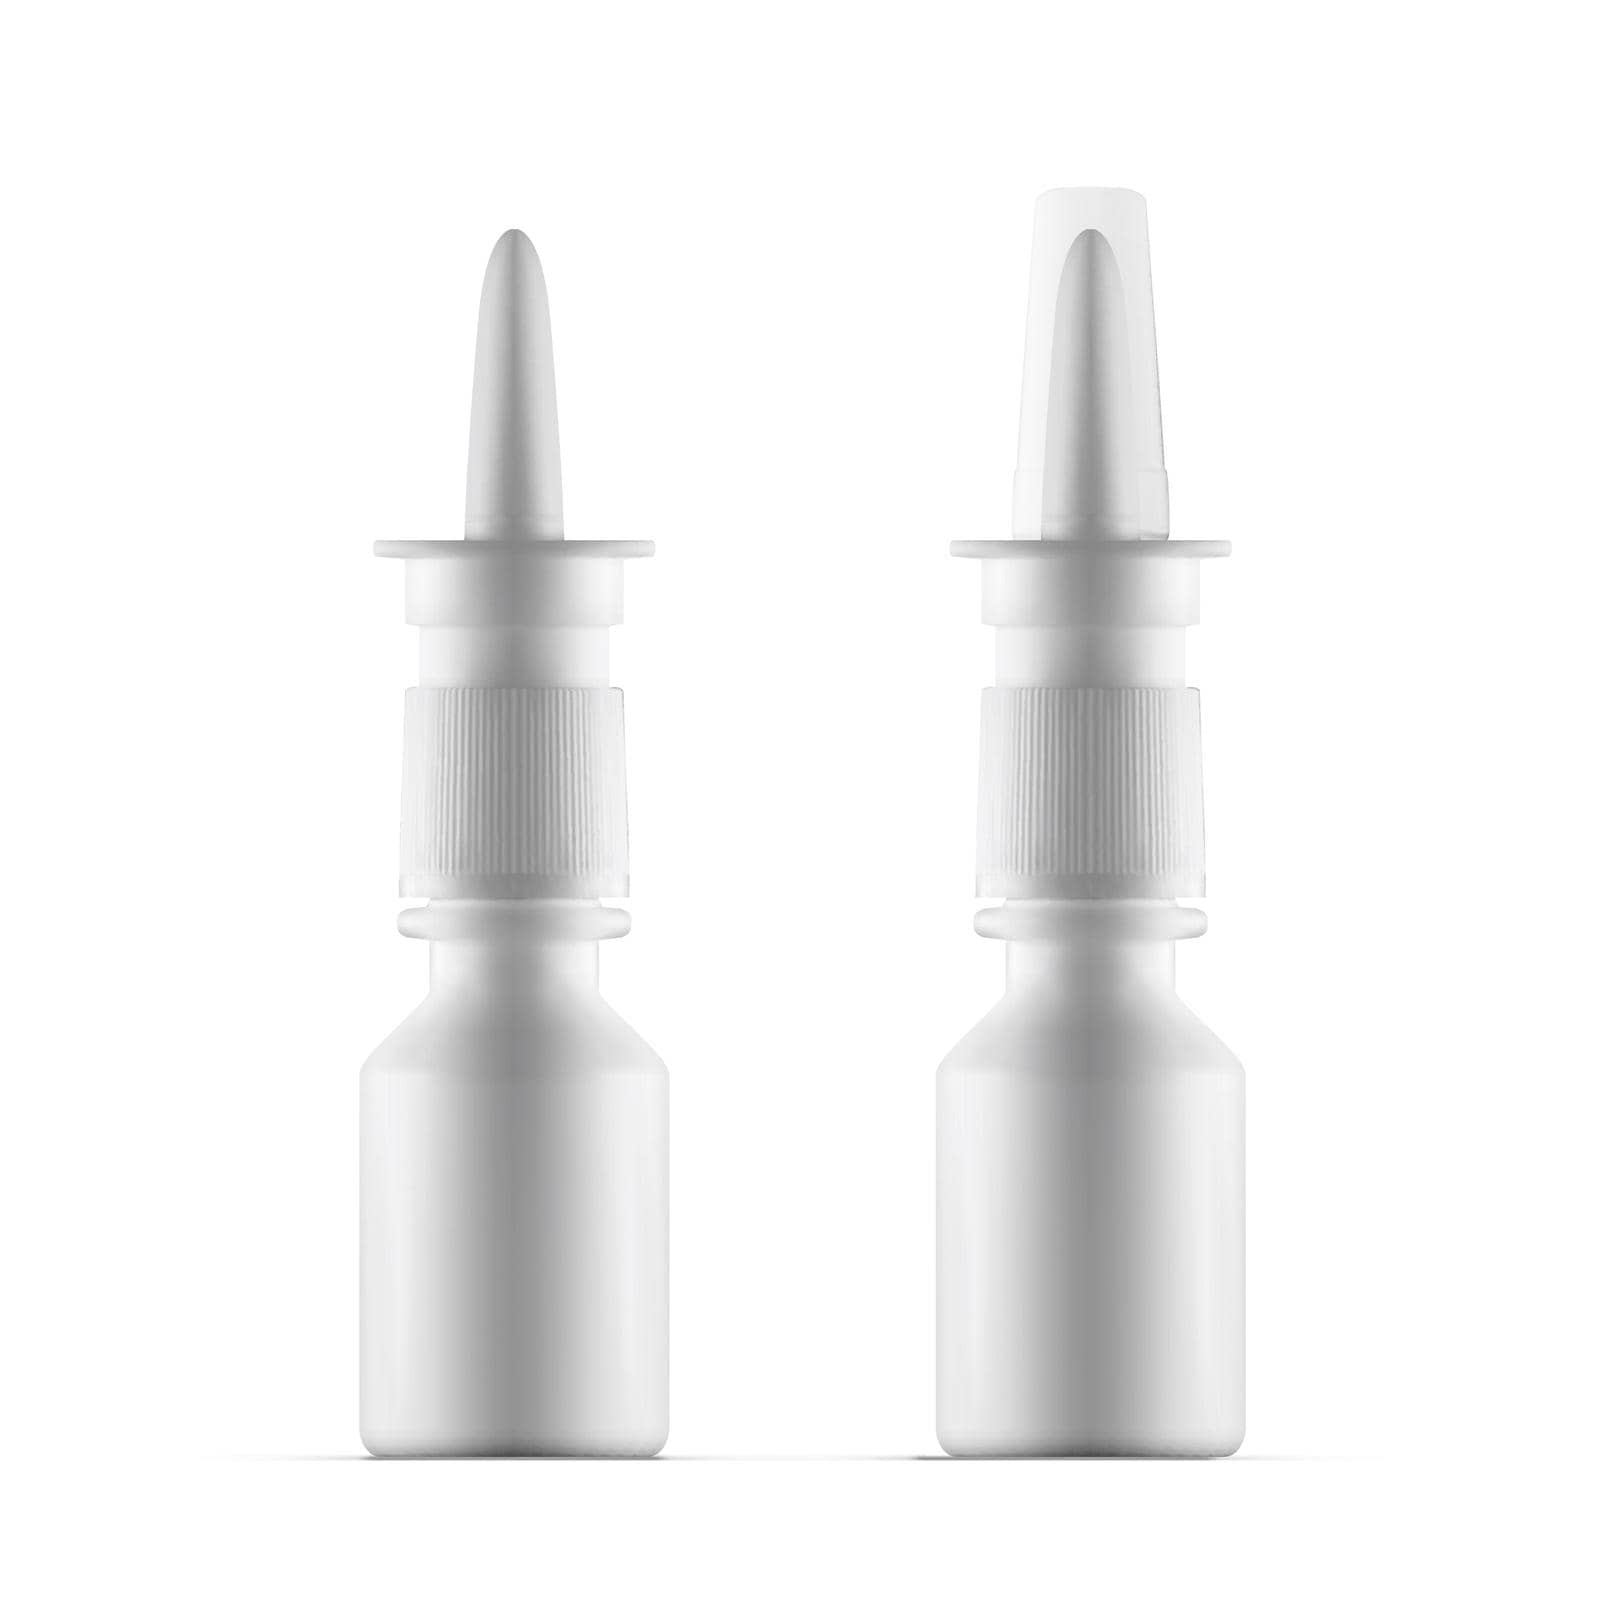 White Plastic Nasal Spray Bottle With Transparent Cap Template. EPS10 Vector